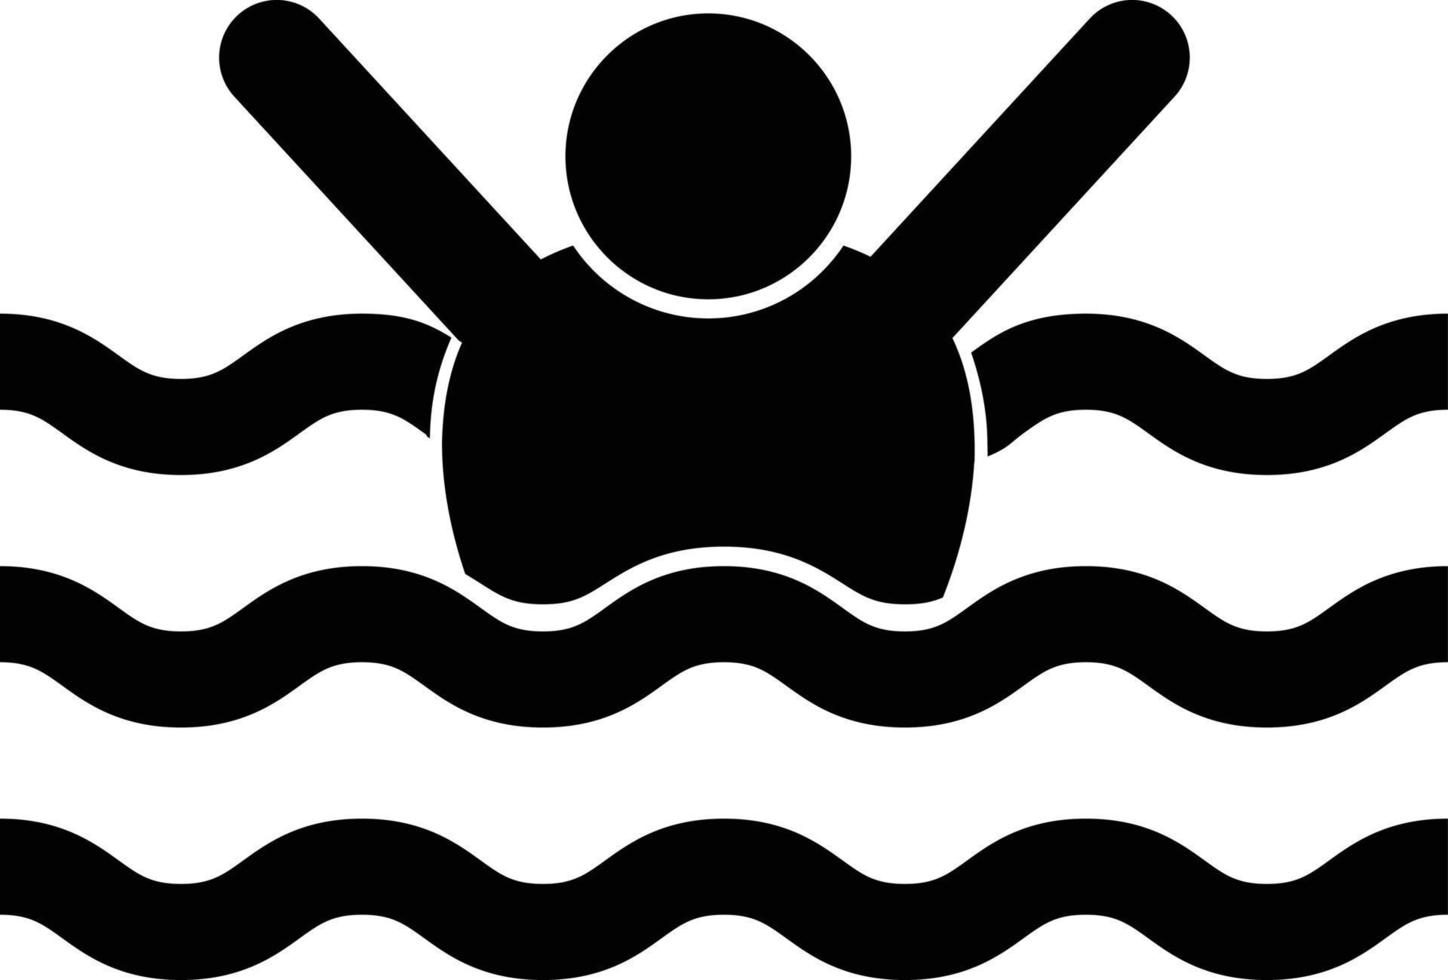 drowned man icon on white background. people accident water sea beach lifeguard sign. drowning man symbol. flat style. vector